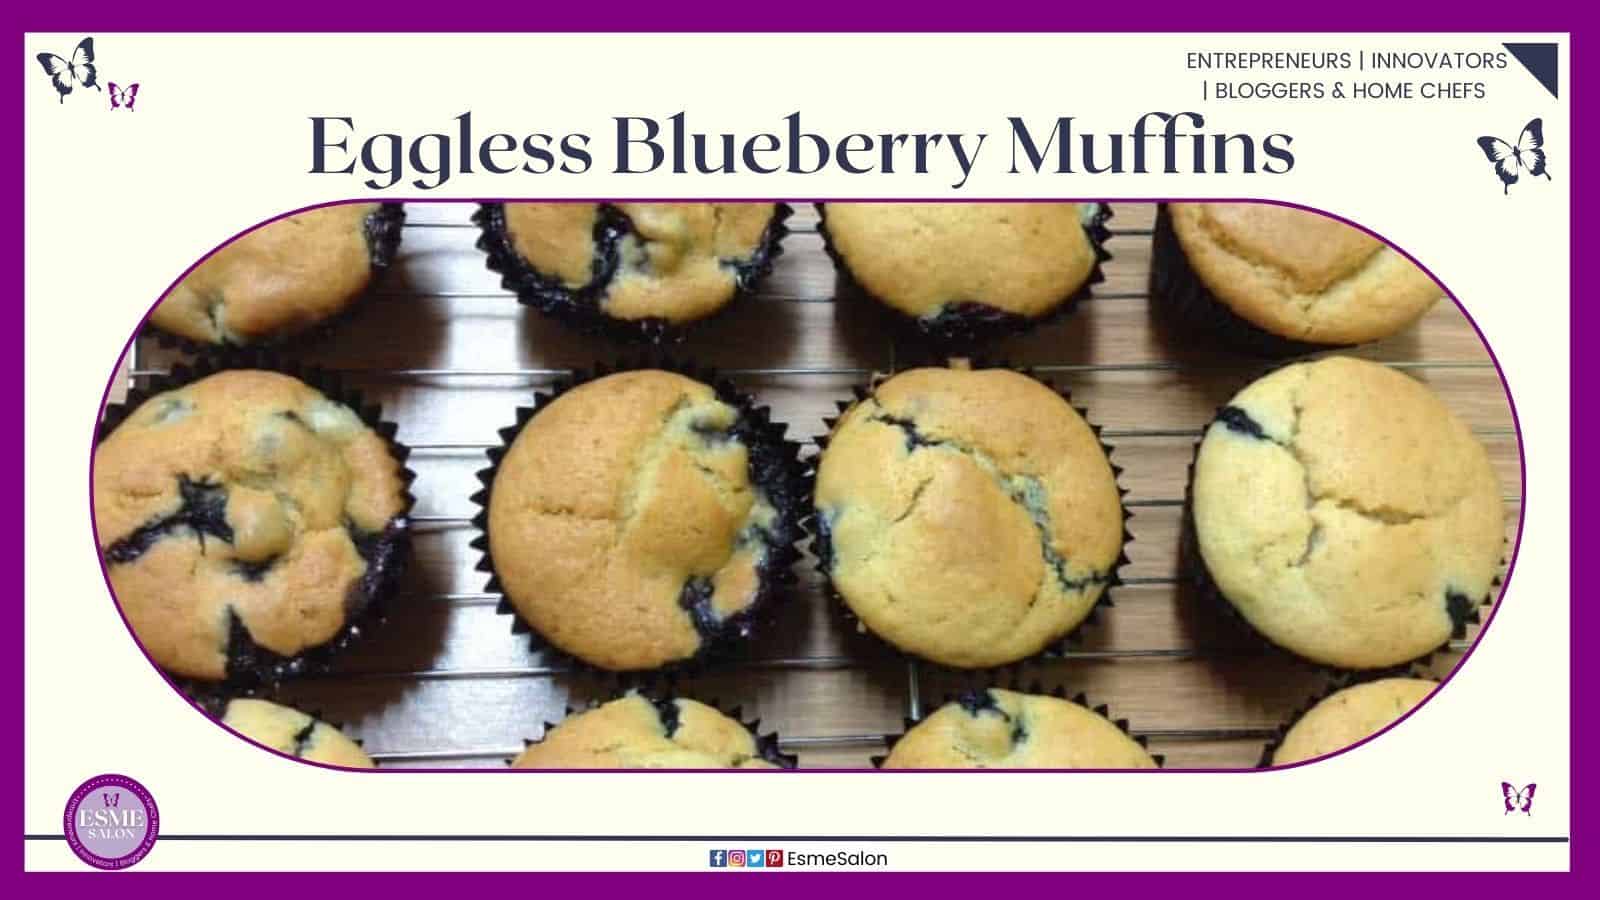 an image of a batch of Eggless Blueberry Muffins in paper casings